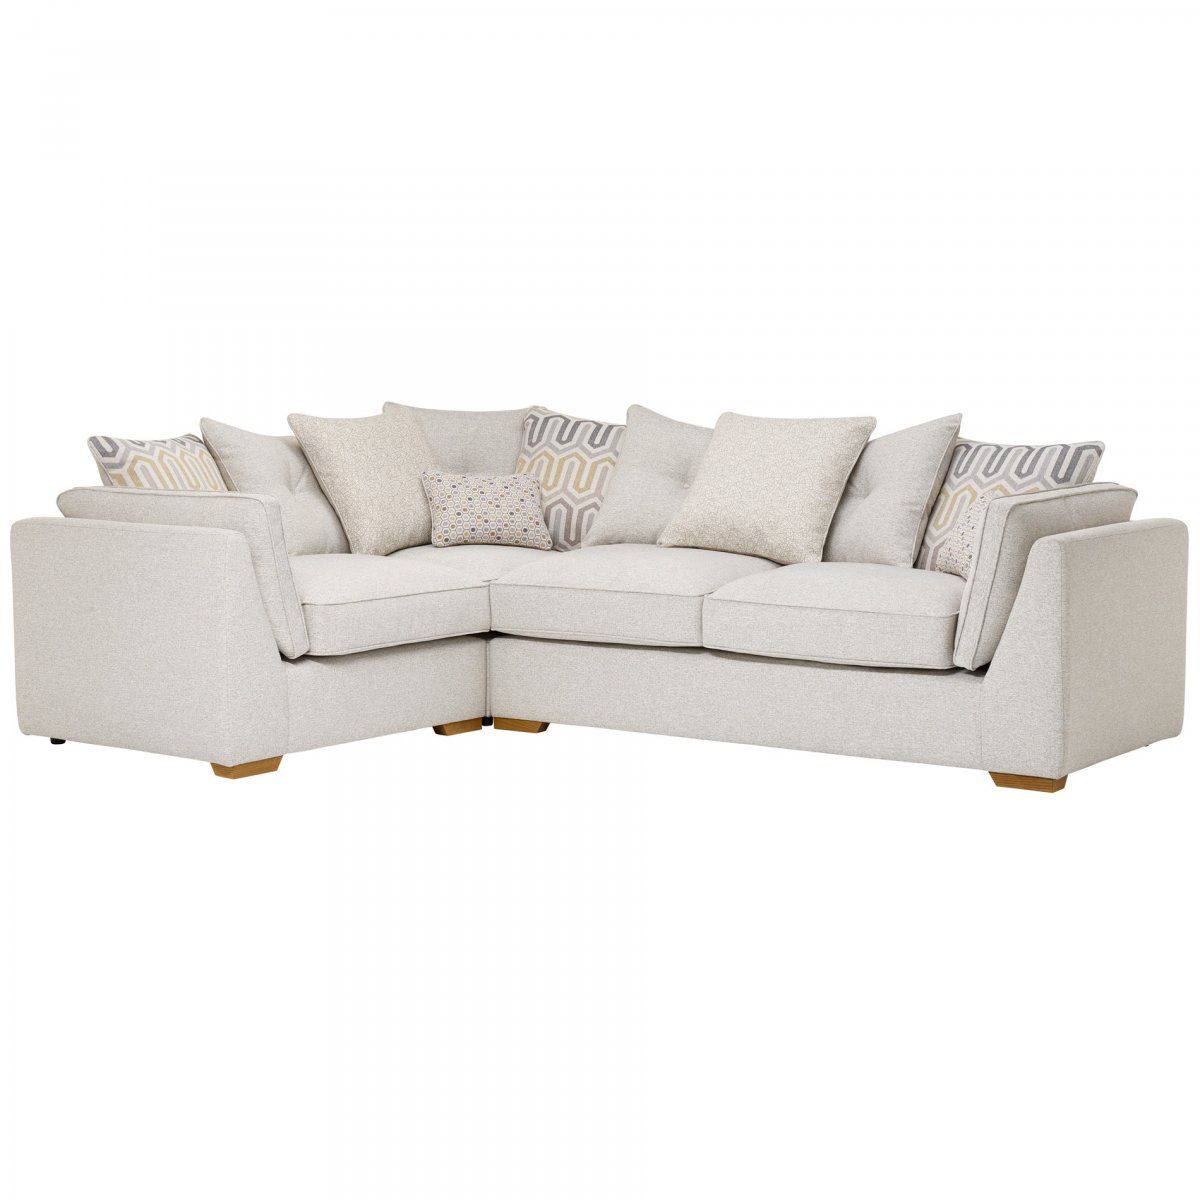 Pasadena Right Hand Corner Pillow Back Sofa | Delivered Free! Intended For Lyvia Pillowback Sofa Sectional Sofas (View 10 of 15)